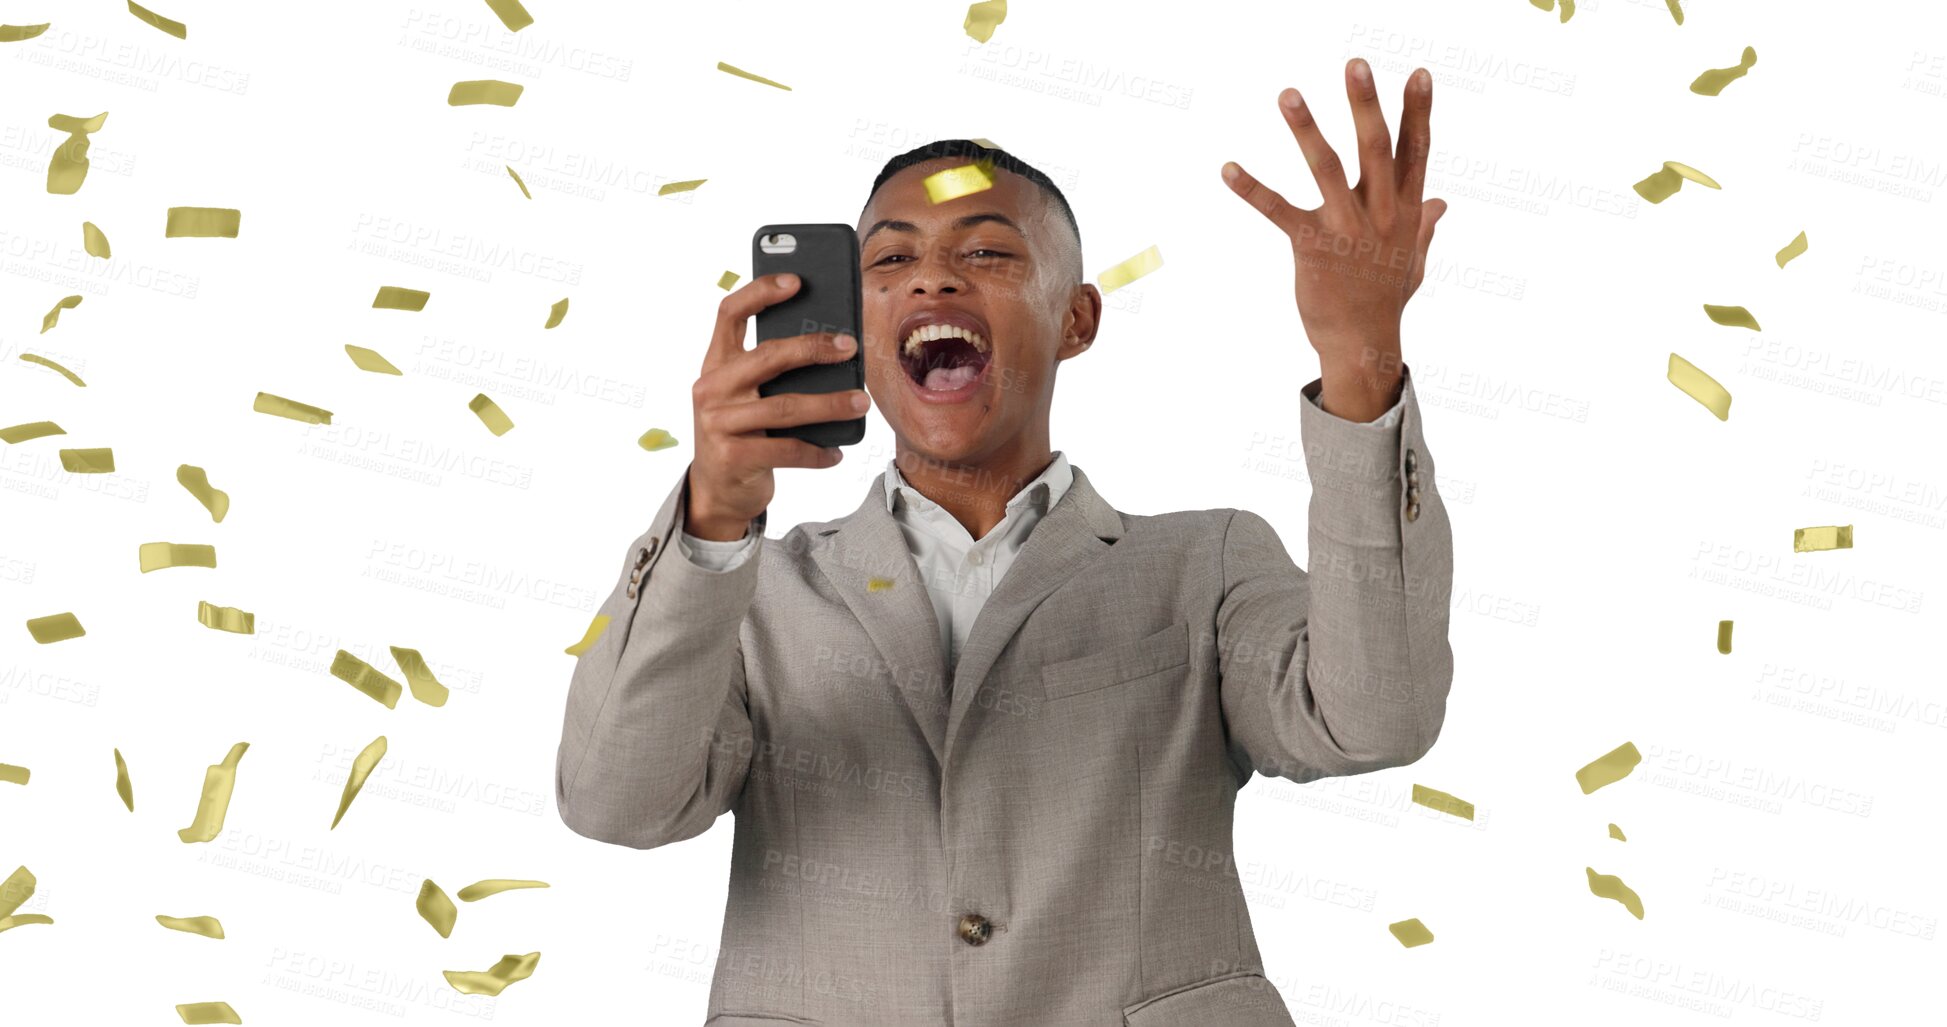 Buy stock photo Confetti, celebration and business man with phone news on isolated, transparent or png background. Glitter, success and male winner with wow smartphone alert for competition, prize or app giveaway